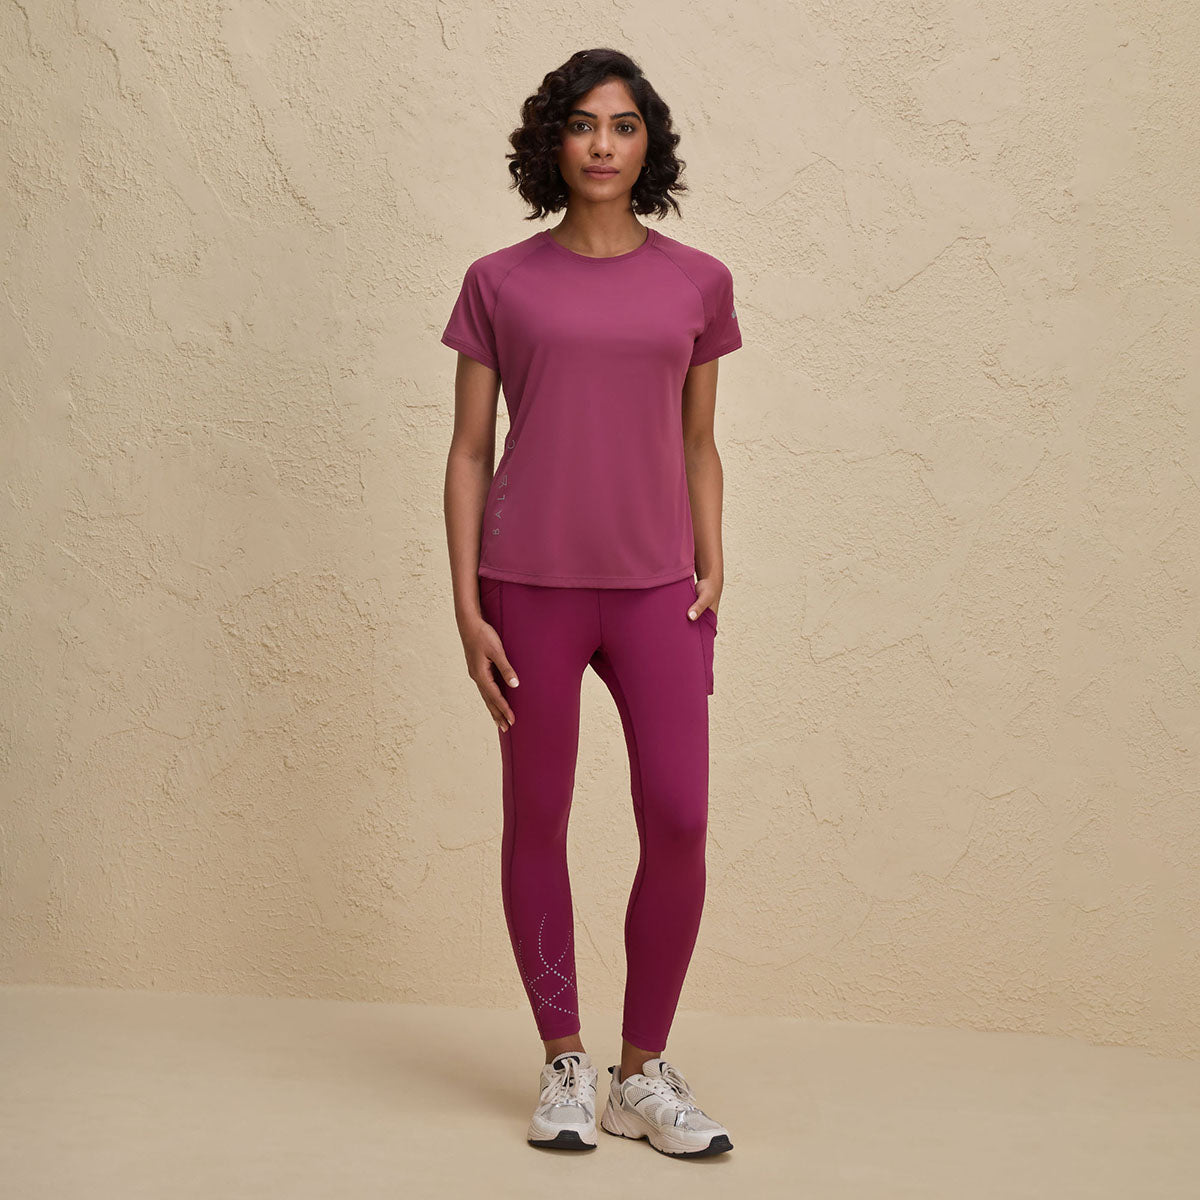 Nykd By Nykaa Half Sleeves Regular Fit Quick Dry Running Fitness Sports Tee-NYK033-Grape